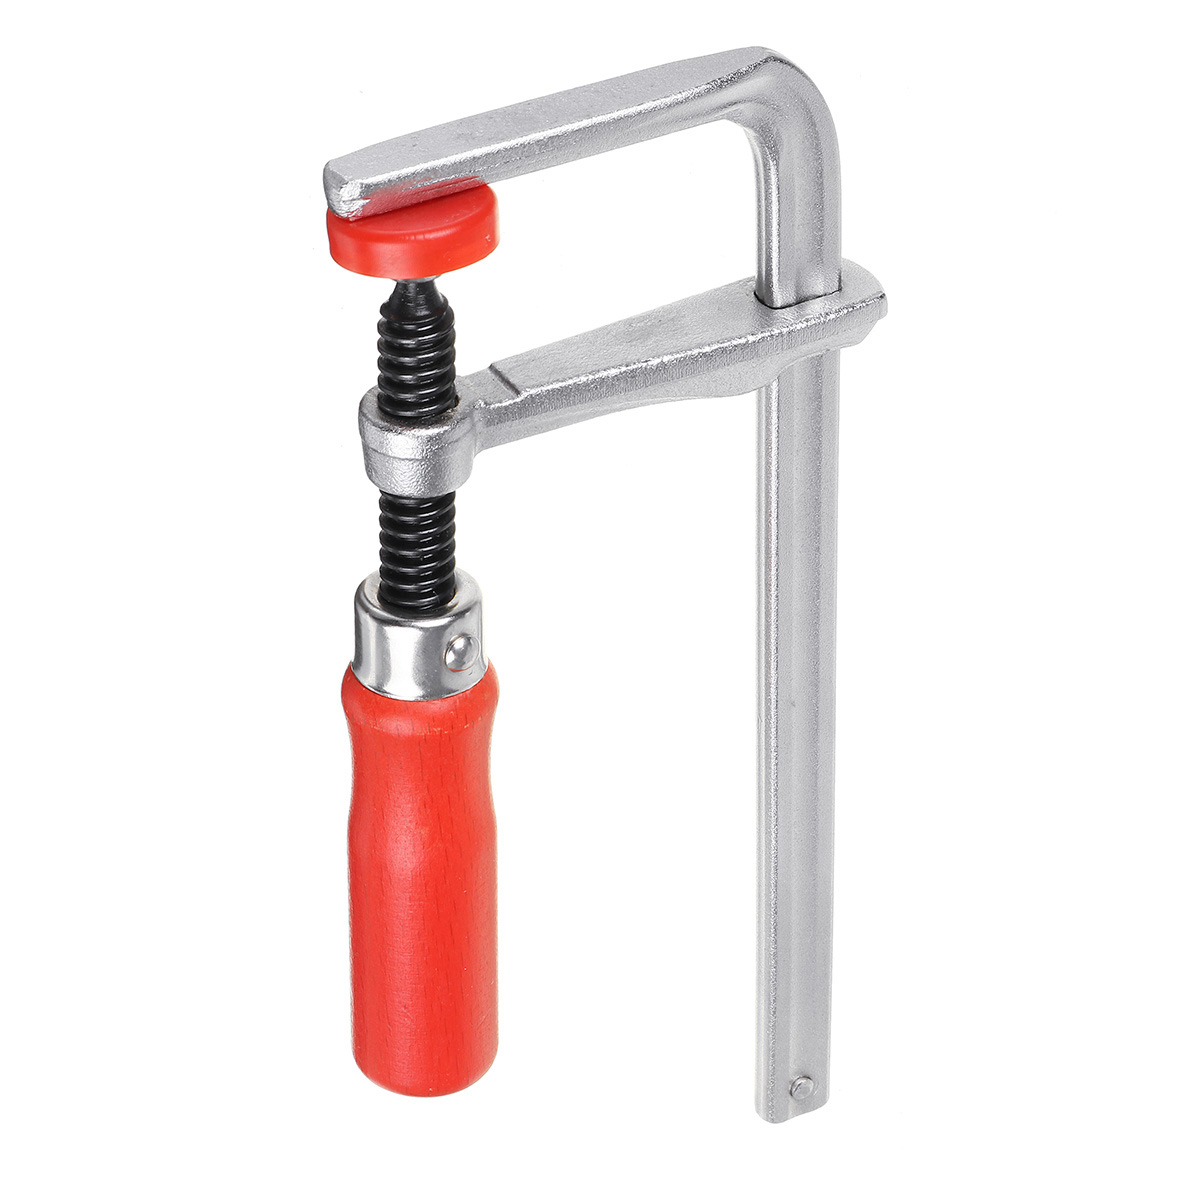 Drillpro-Quick-Screw-Guide-Rail-Clamp-for-MFT-Table-and-Guide-Rail-System-Woodworking-F-Clamp-DIY-To-1835112-4